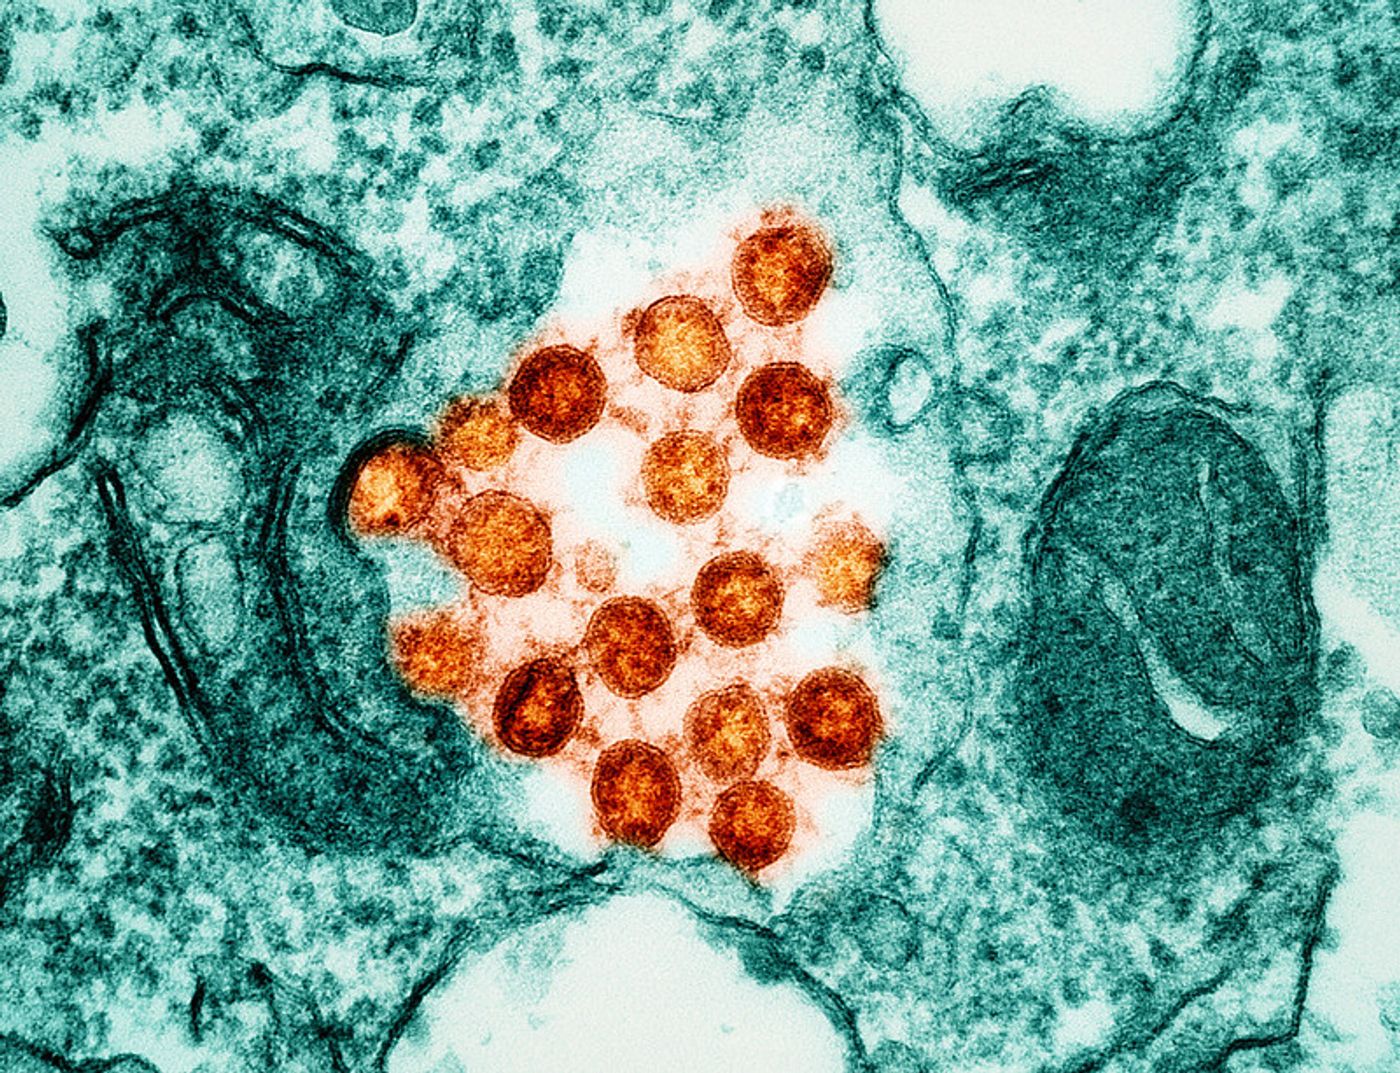 Transmission electron micrograph of SARS-CoV-2 virus particles (colorized orange), isolated from a patient. Image captured at the NIAID Integrated Research Facility (IRF) in Fort Detrick, Maryland. Credit: NIAID